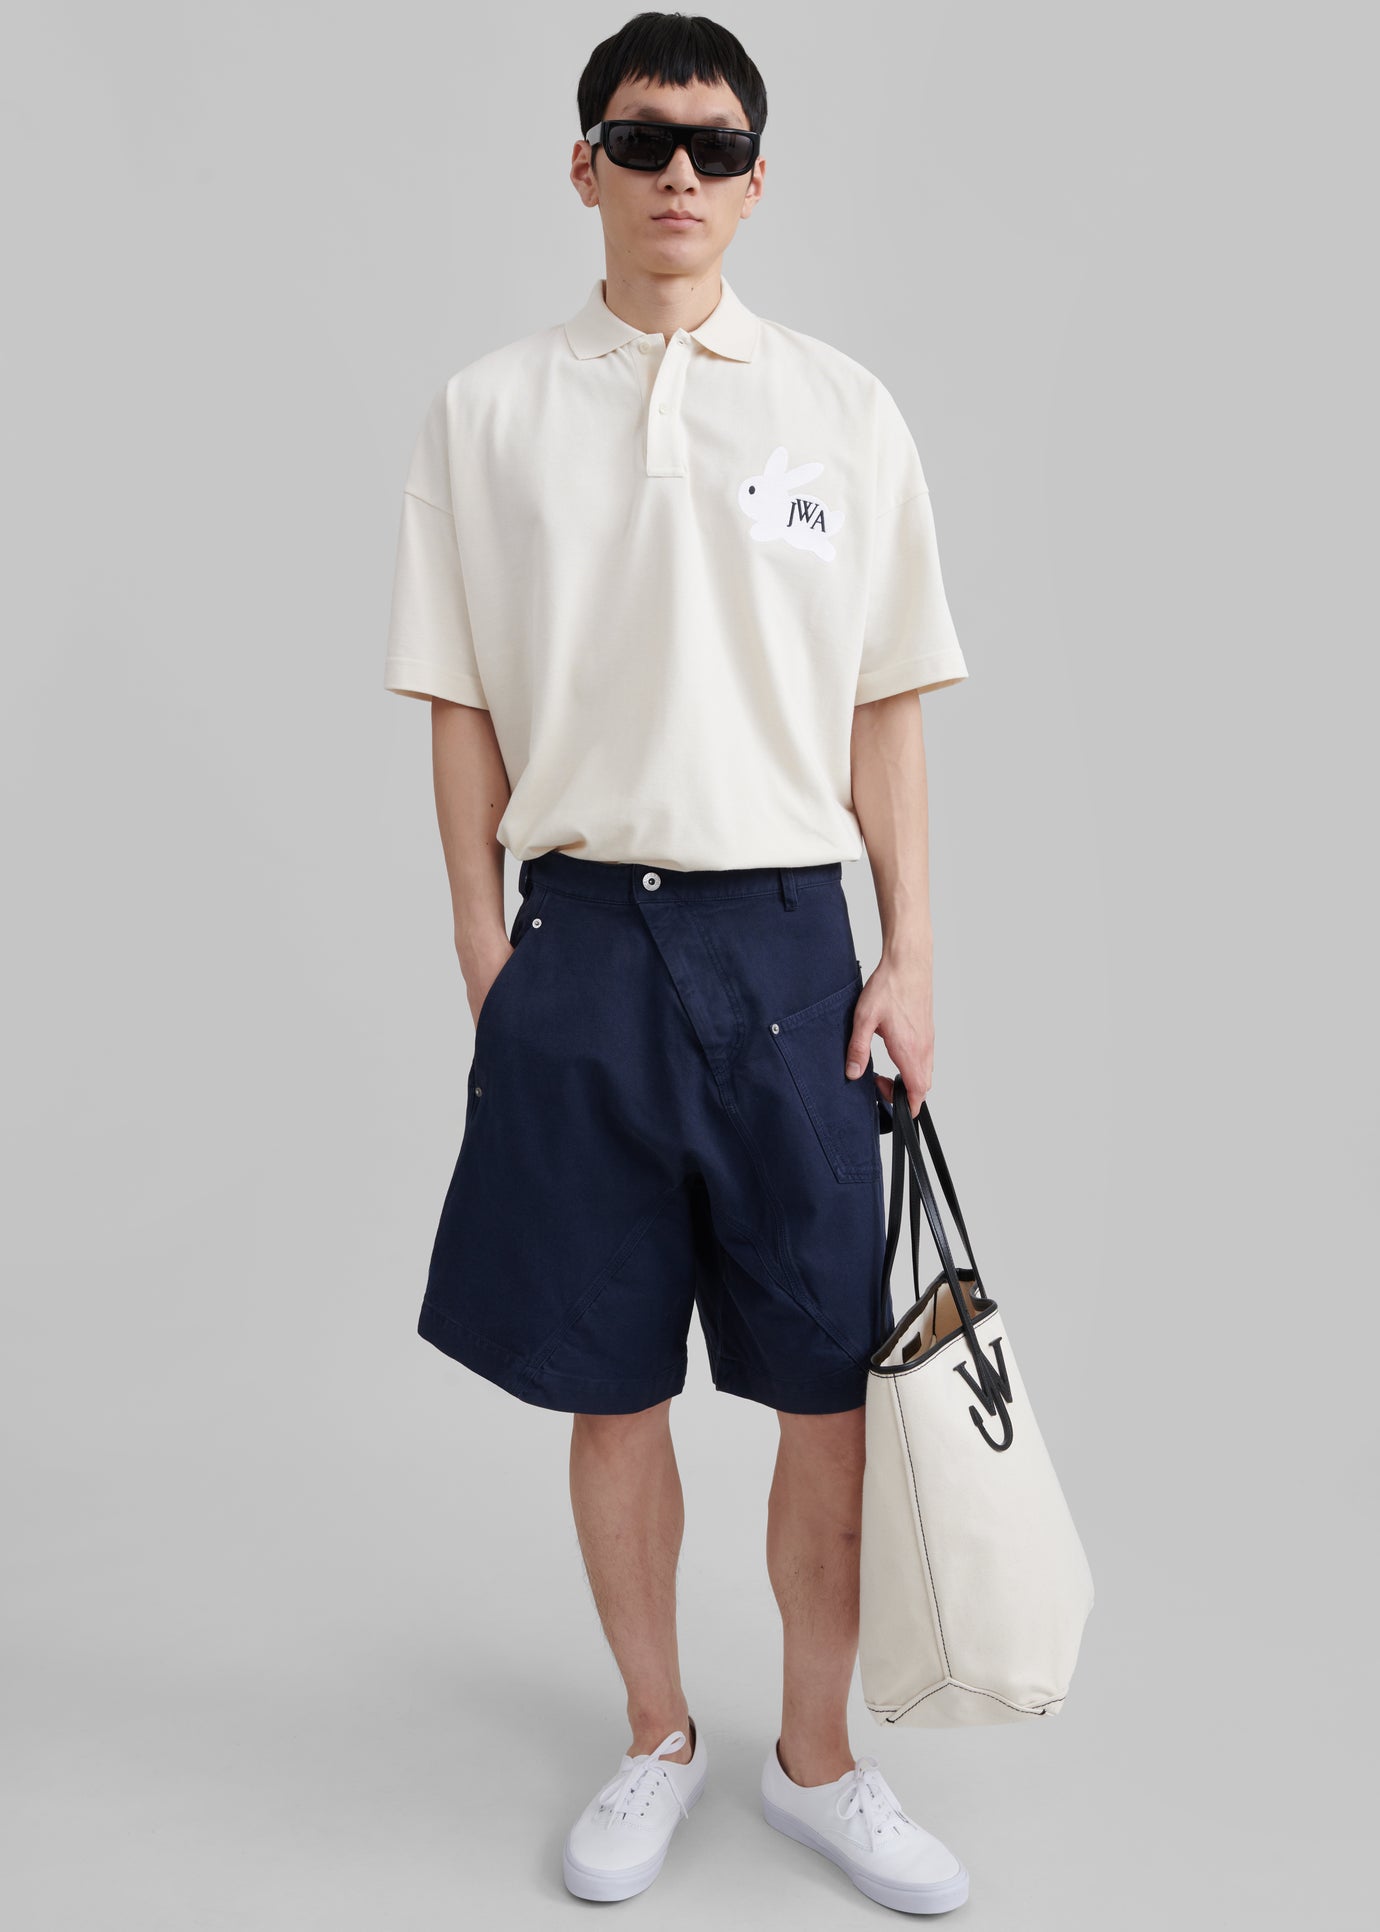 JW Anderson Twisted Shorts - Navy